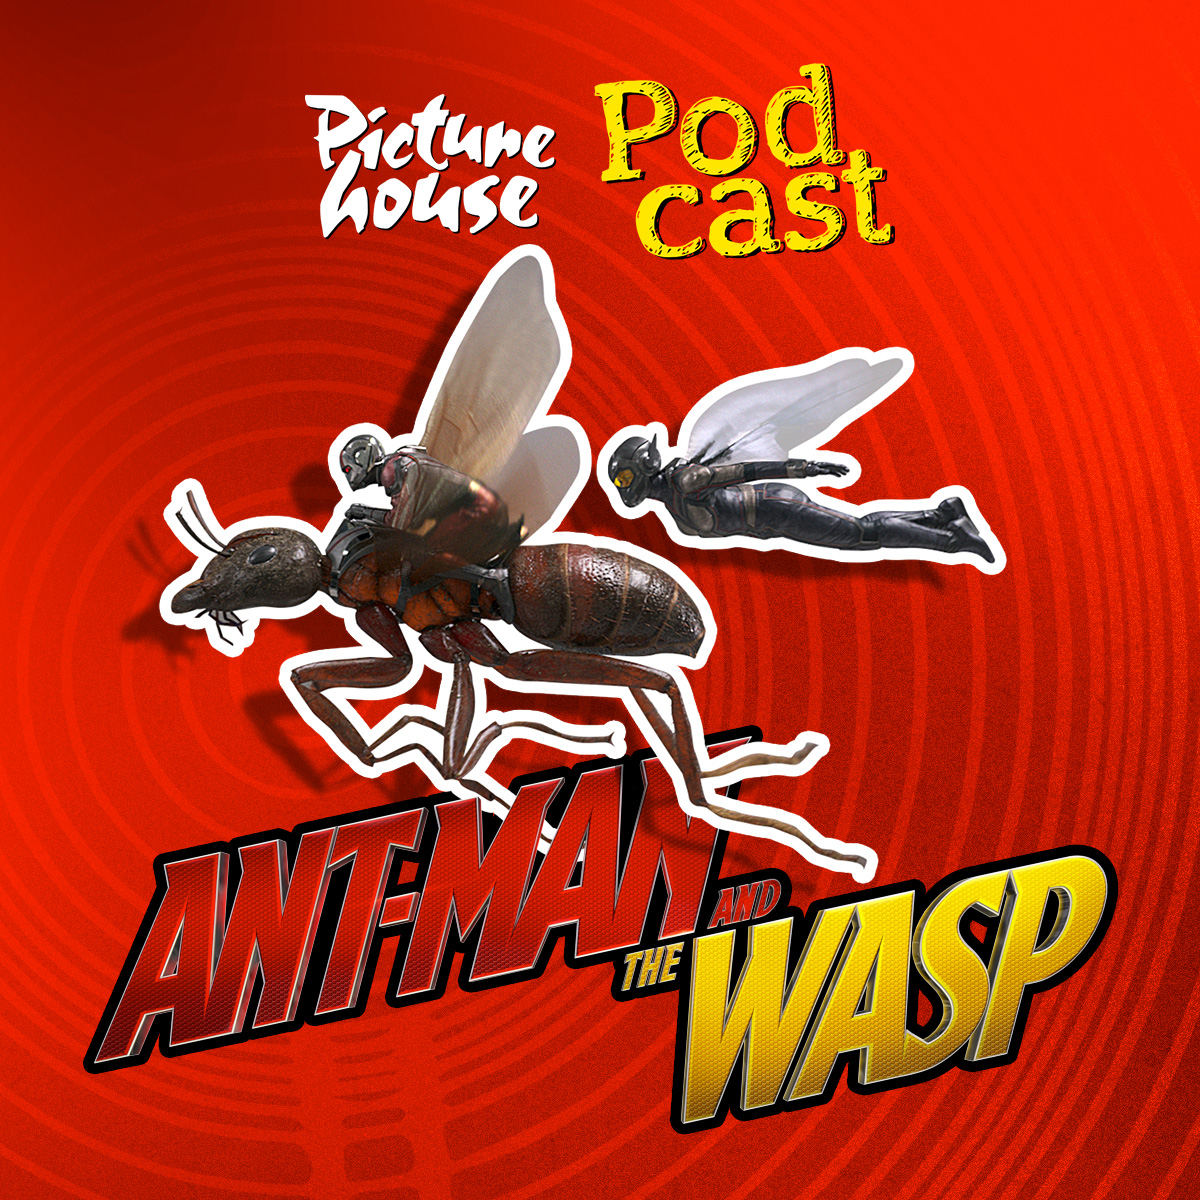 Ant-Man And The Wasp with Peyton Reed and Stephen Broussard | Picturehouse Podcast